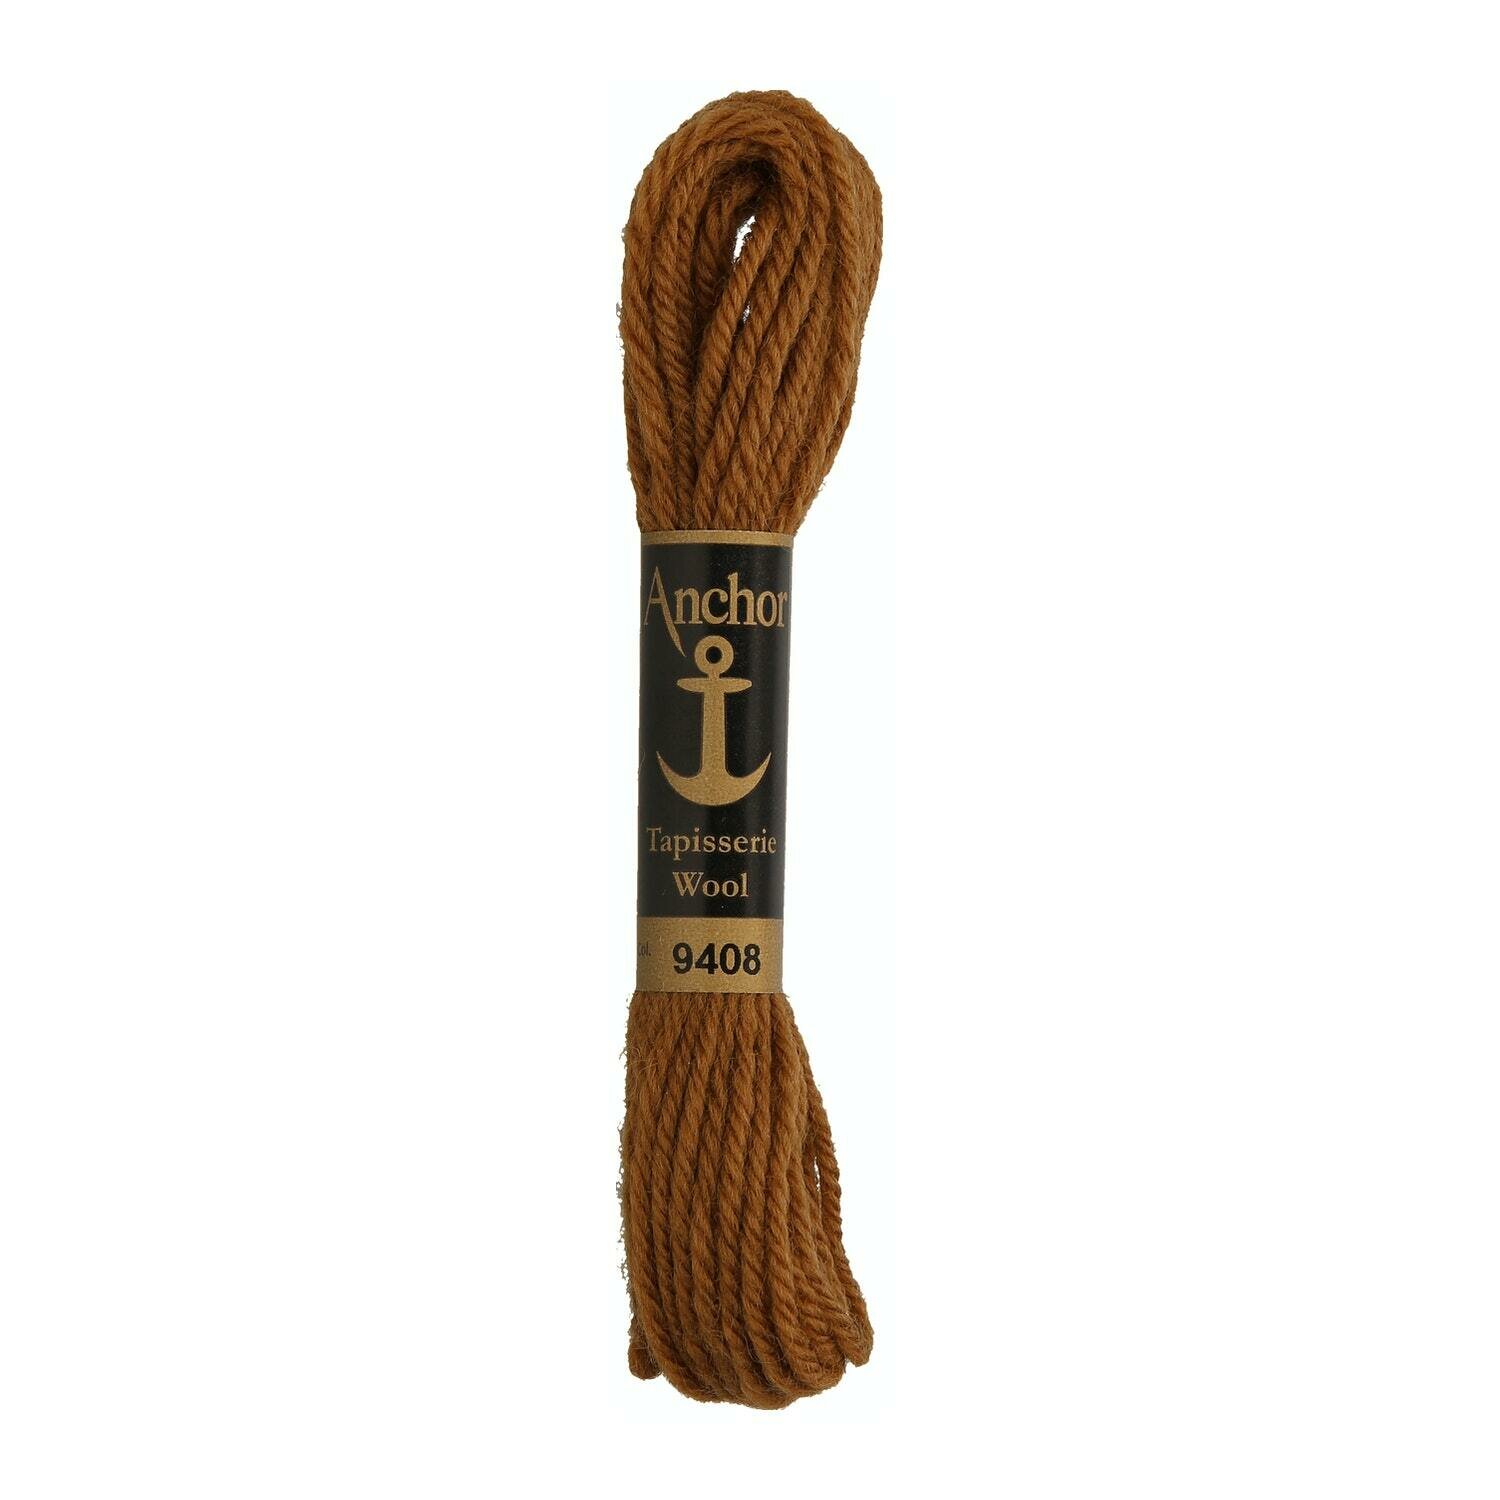 Anchor Tapisserie Wool #  09408